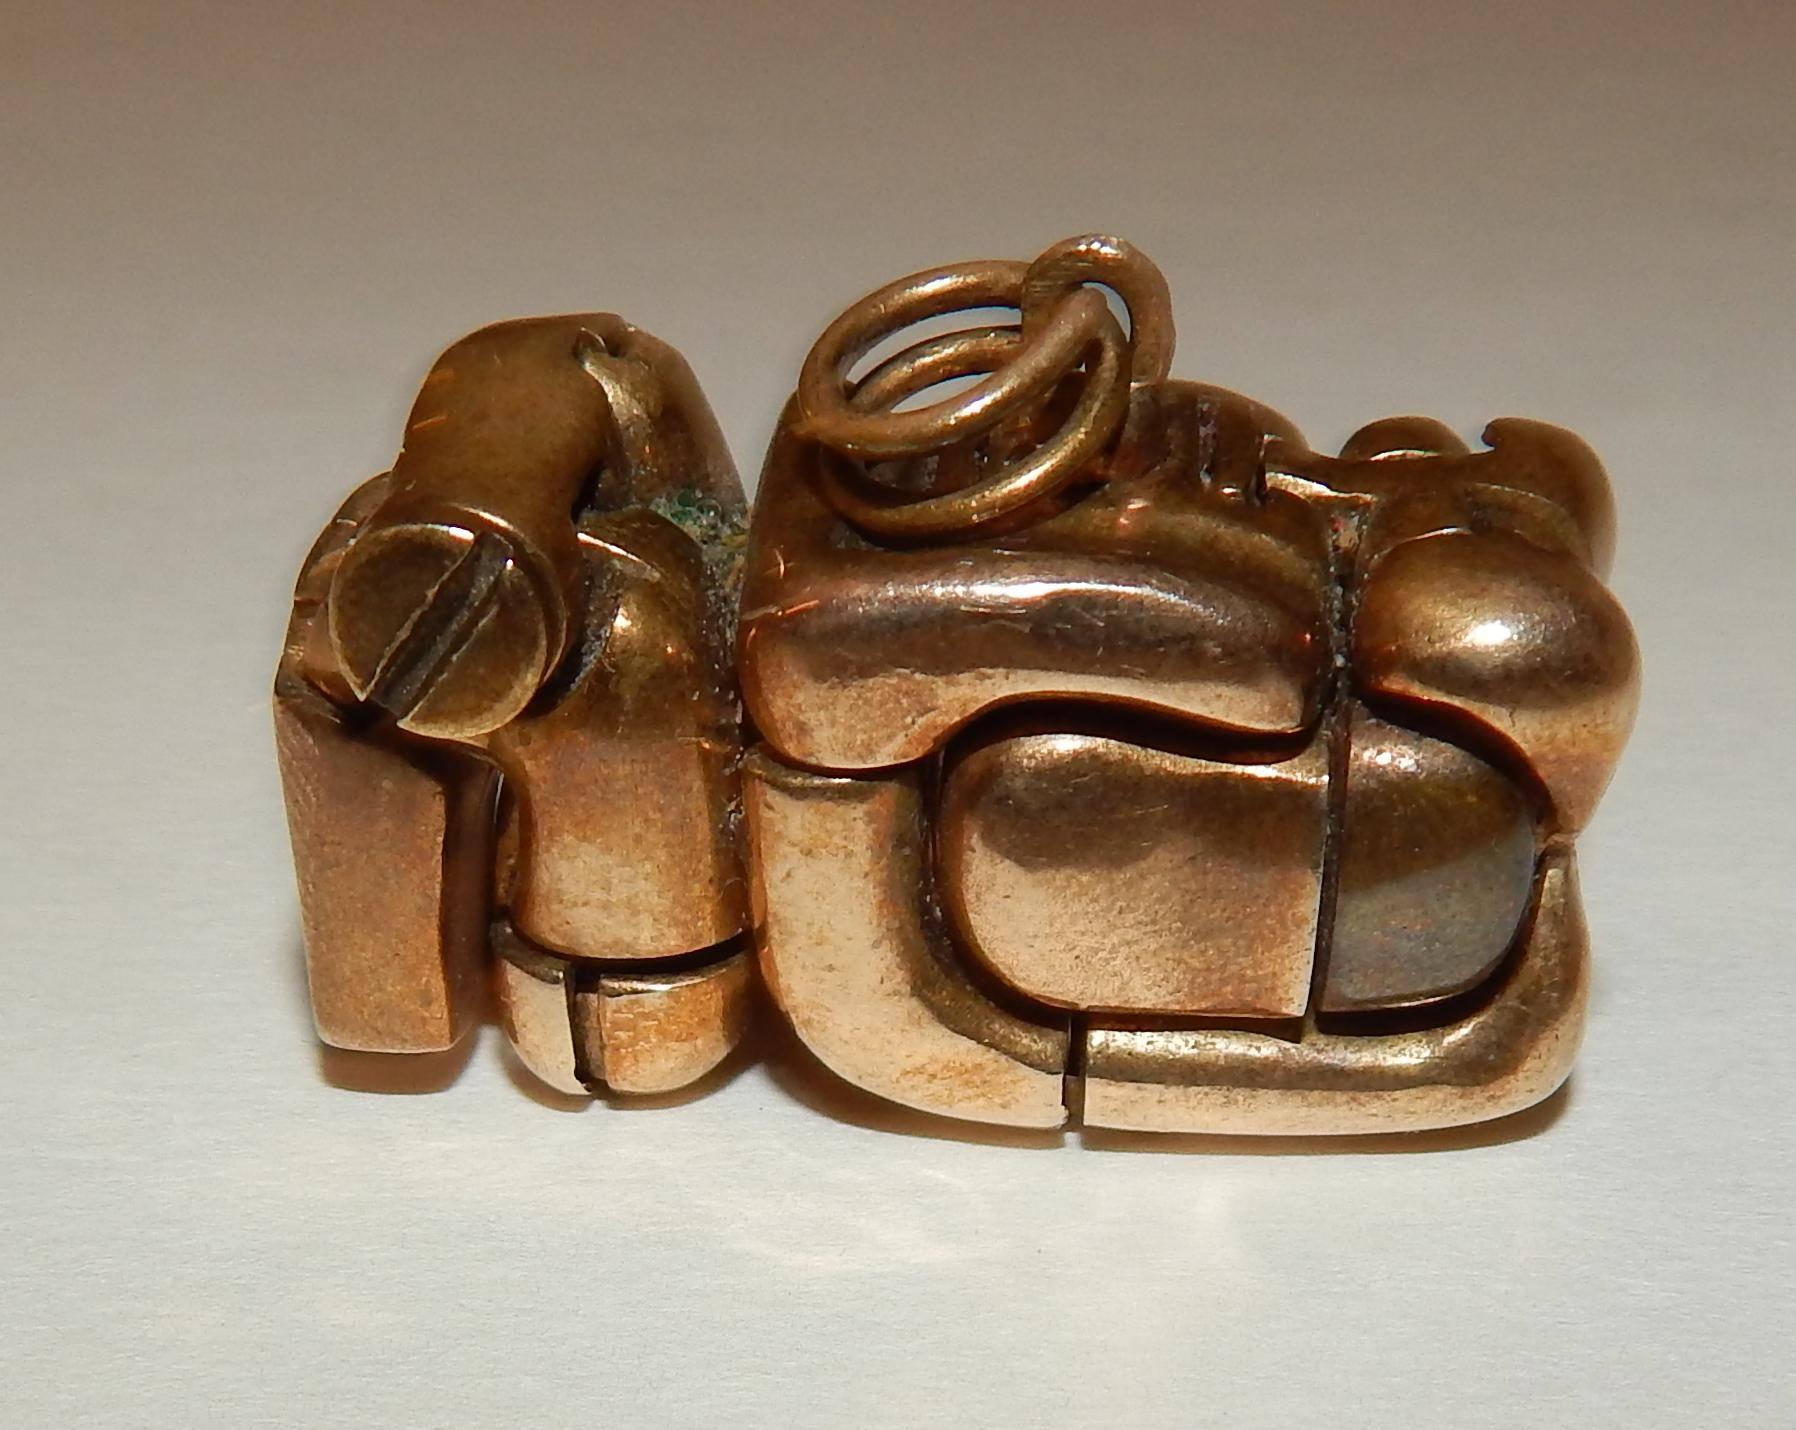 A bronze sculpture by Miguel Berrocal (1933-2006)
Created circa 1969-1970.
This bronze puzzle sculpture is made of 23 pieces and is accented with a small blue gemstone.
Measures: 1 1/4